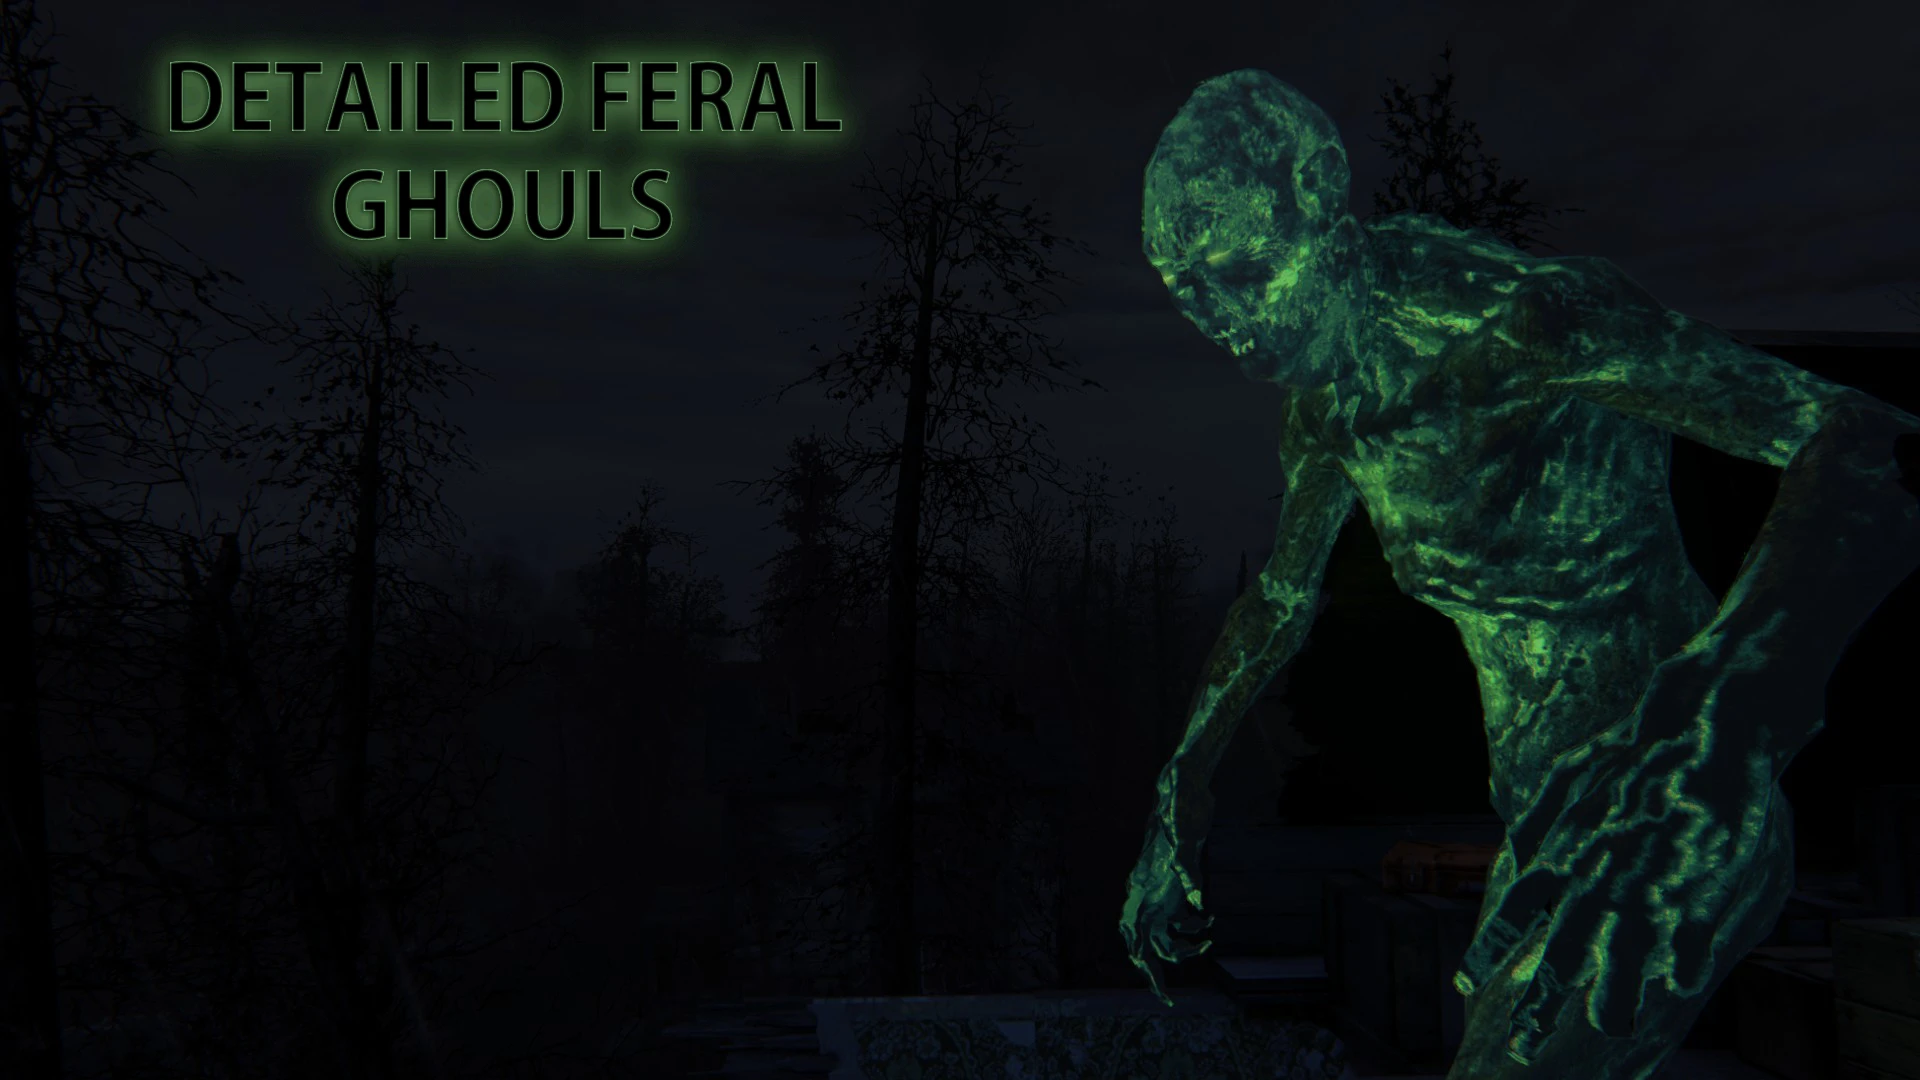 Feral ghoul from fallout 4 фото 97